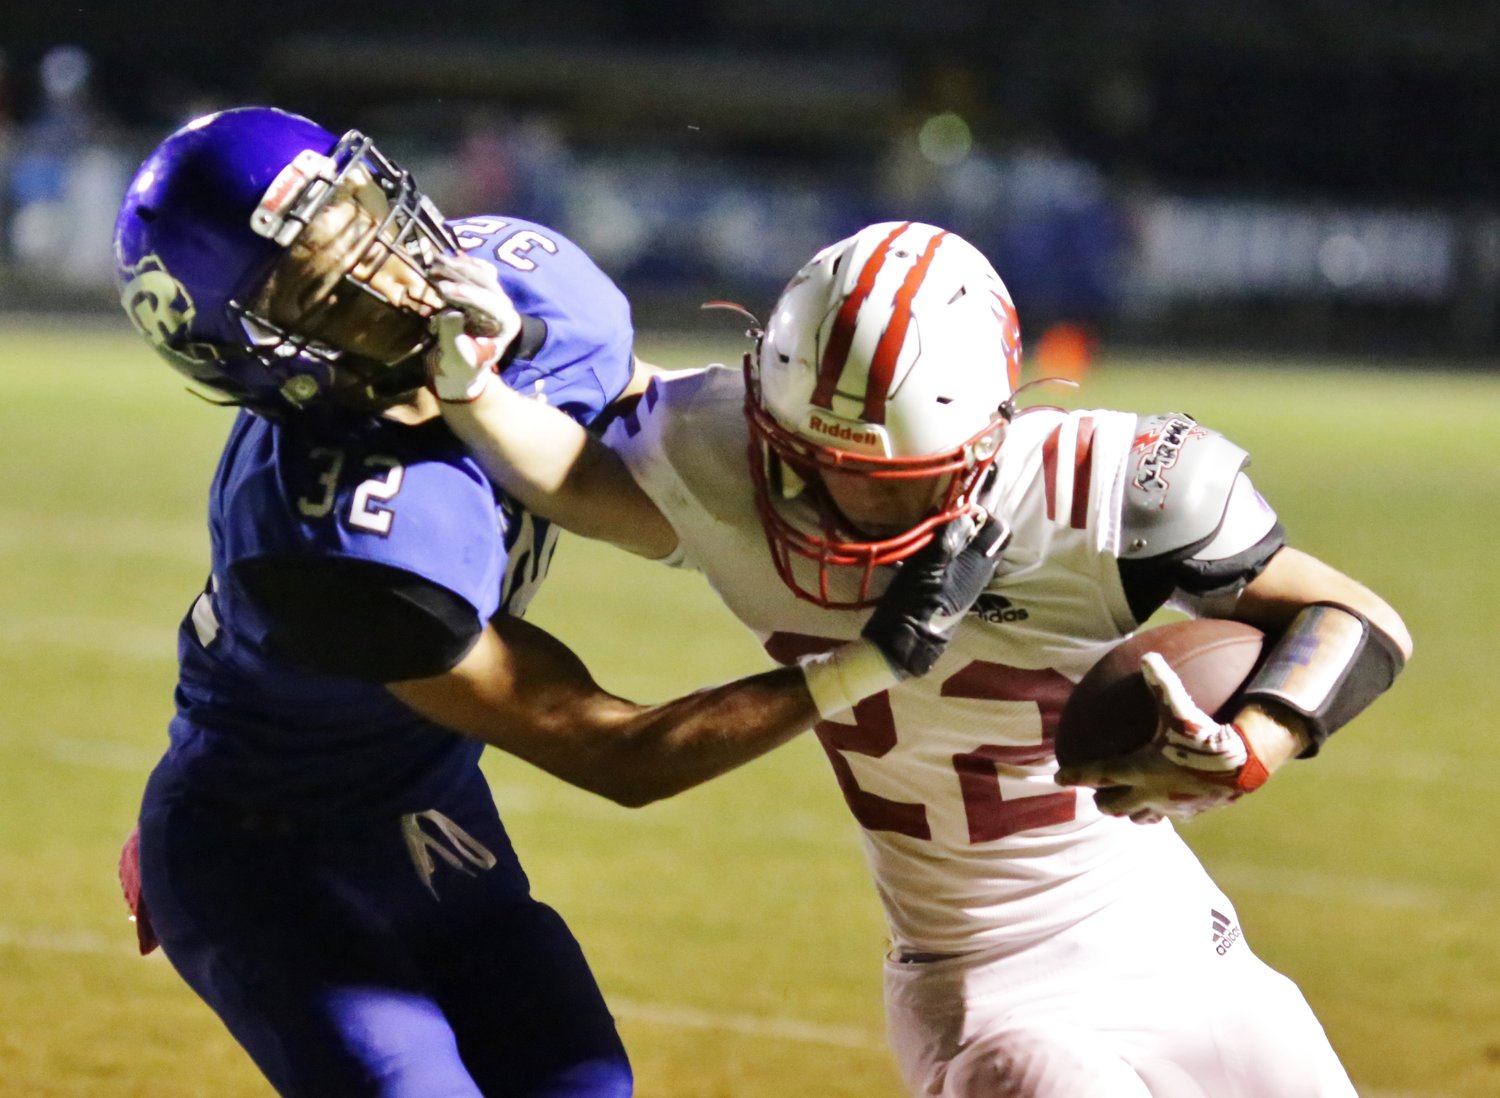 Alba-Golden’s Glen Hartley, demonstrating a stiff-arm, ran with abandon in Friday’s win against Rivercrest.